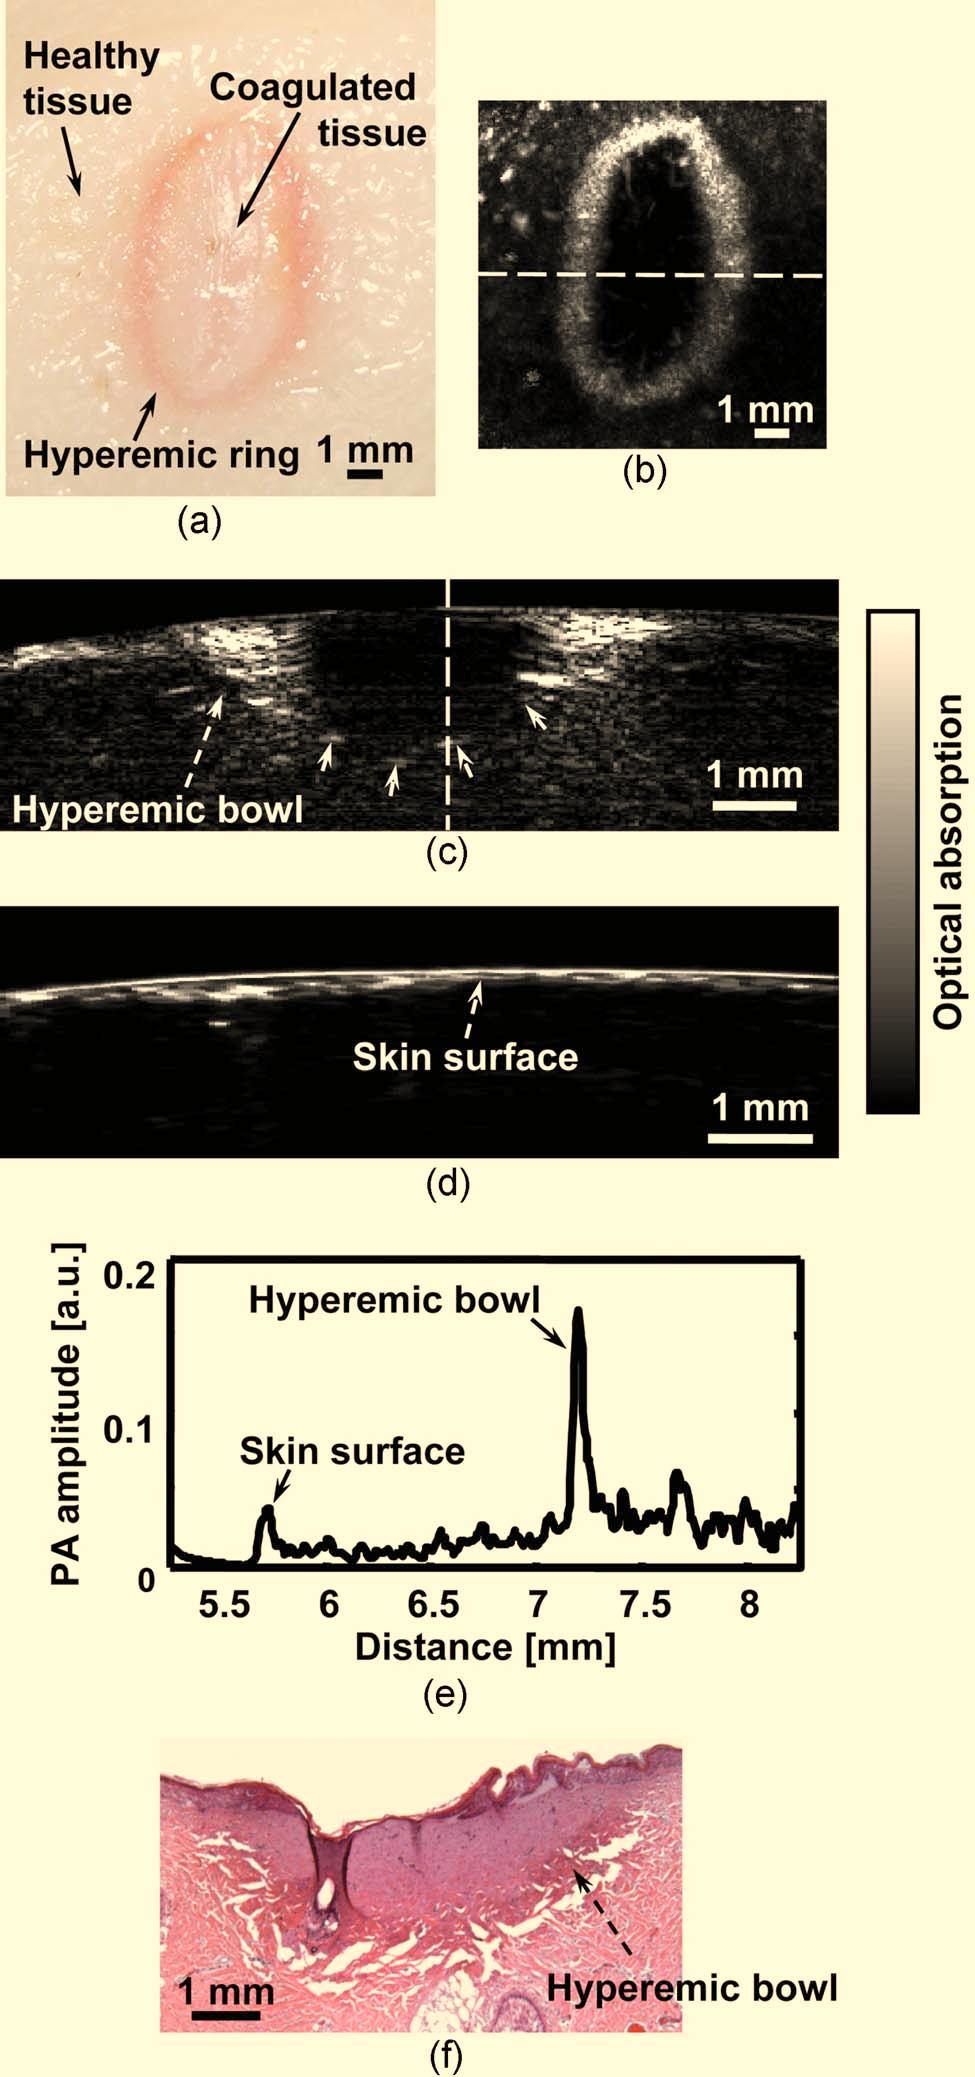 Fig. 2 PAM image of an acute skin burn heated at 175 C for 20 s: a photograph of the burn from the epidermal side, b MAP image showing the morphology of the hyperemic ring, c B-scan image of the